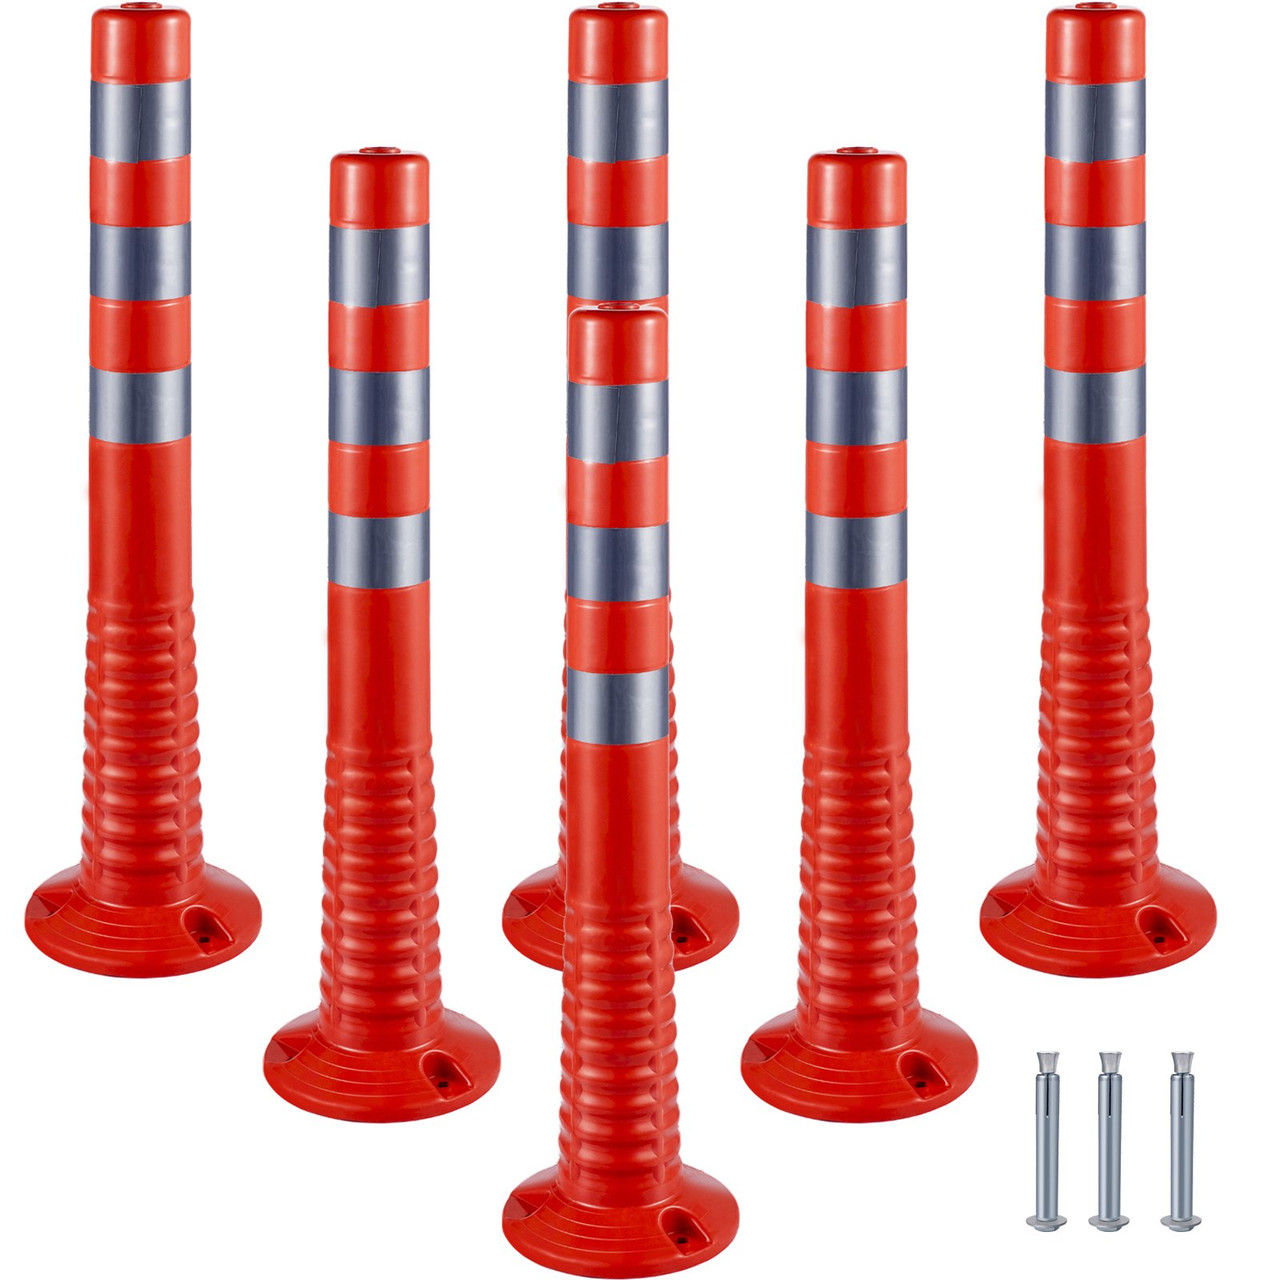 Traffic Delineator, 6 PCS Posts Channelizer Cone, Delineator Post Kit 30 in Height, PU Traffic Post, Orange Safety Cones, Portable Spring Posts with Base, Barrier Cones with Reflective Bands